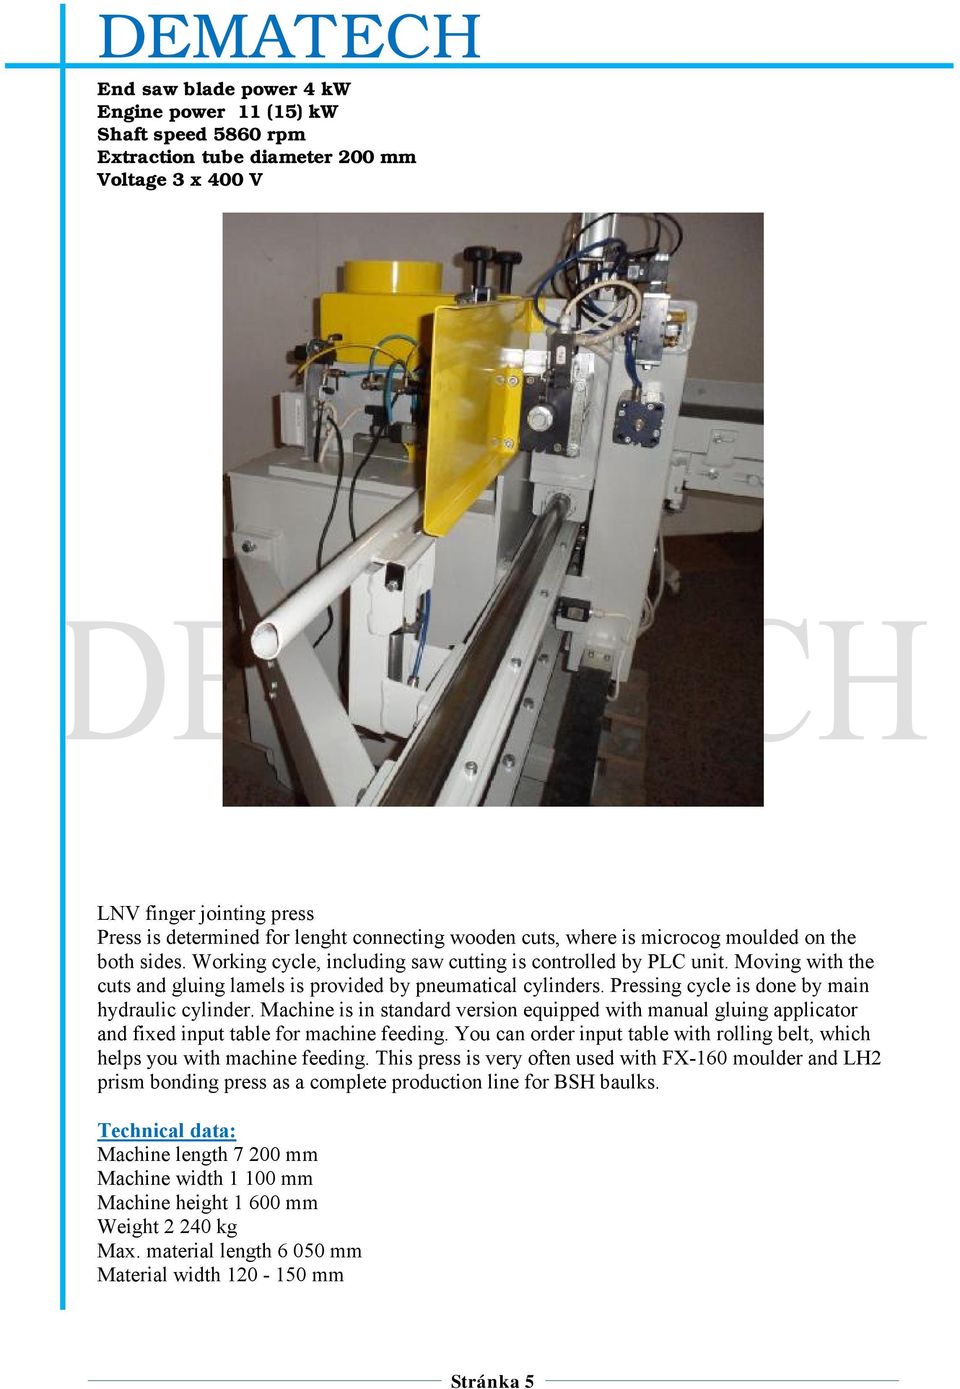 Pressing cycle is done by main hydraulic cylinder. Machine is in standard version equipped with manual gluing applicator and fixed input table for machine feeding.